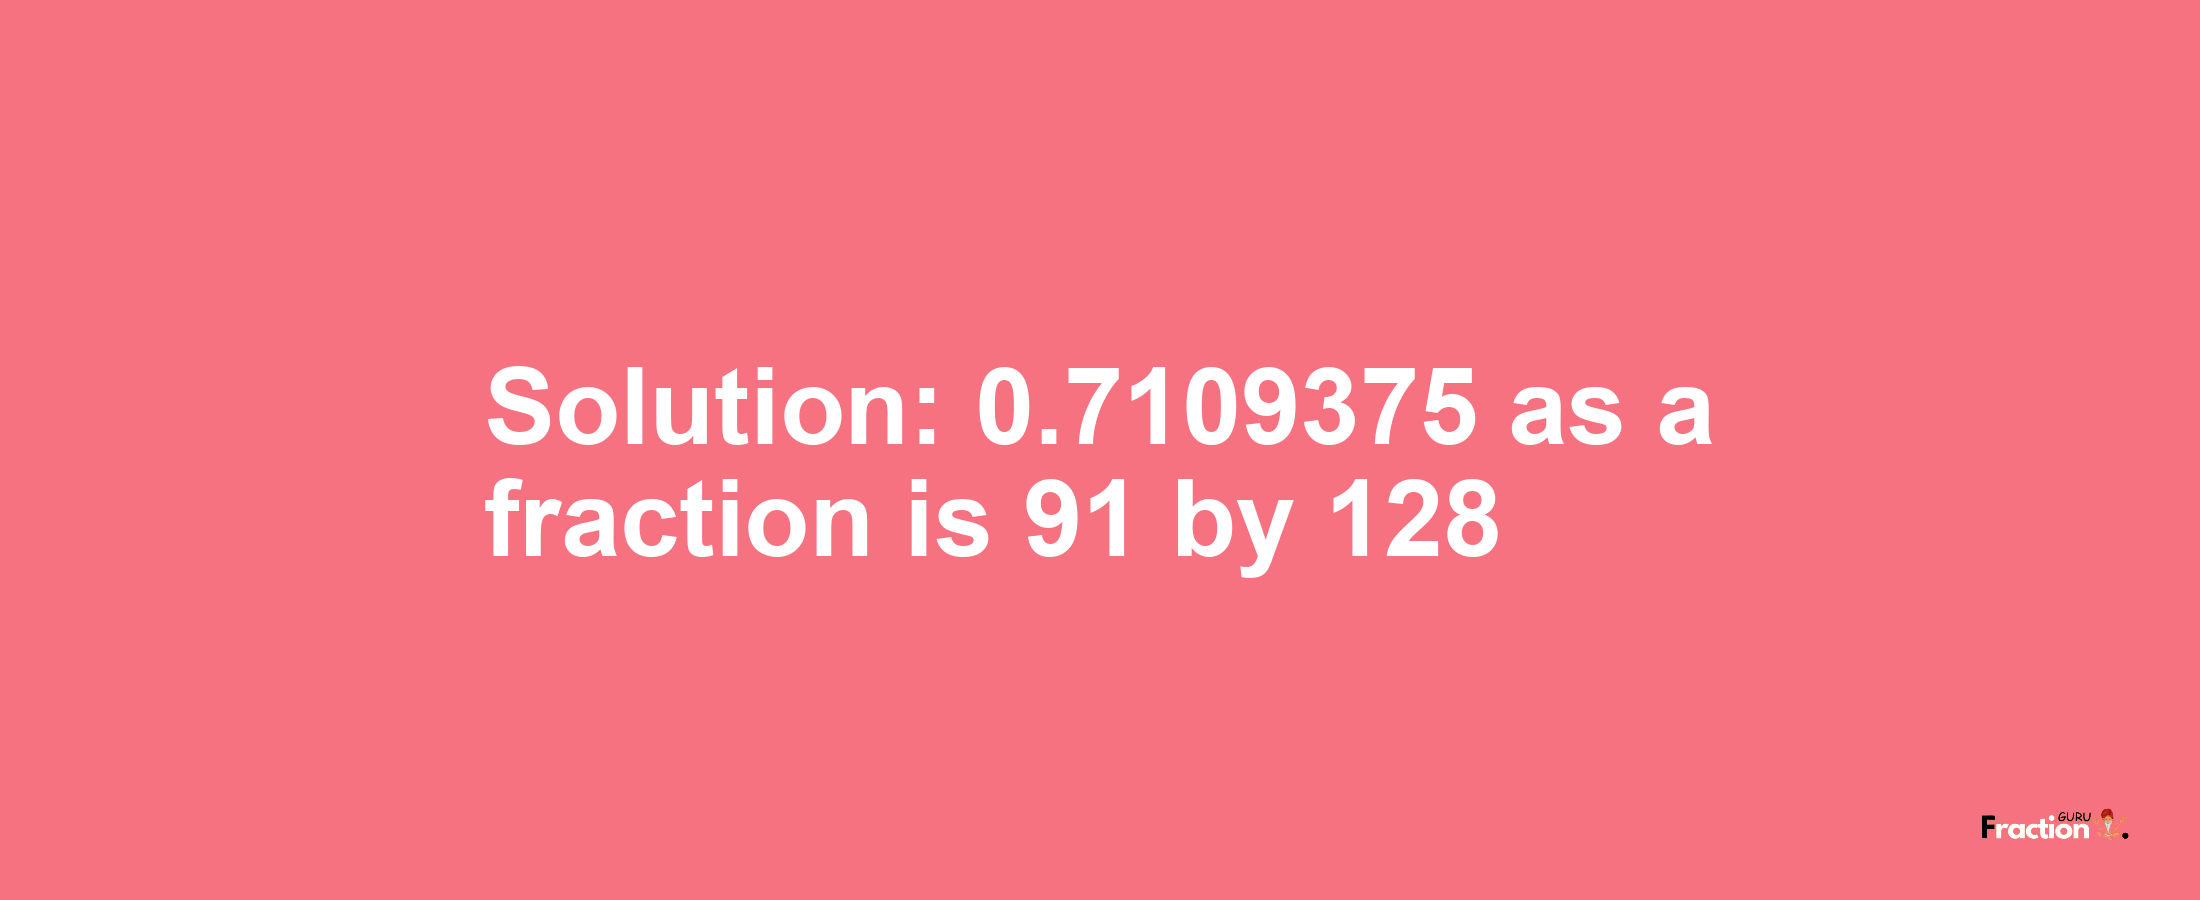 Solution:0.7109375 as a fraction is 91/128